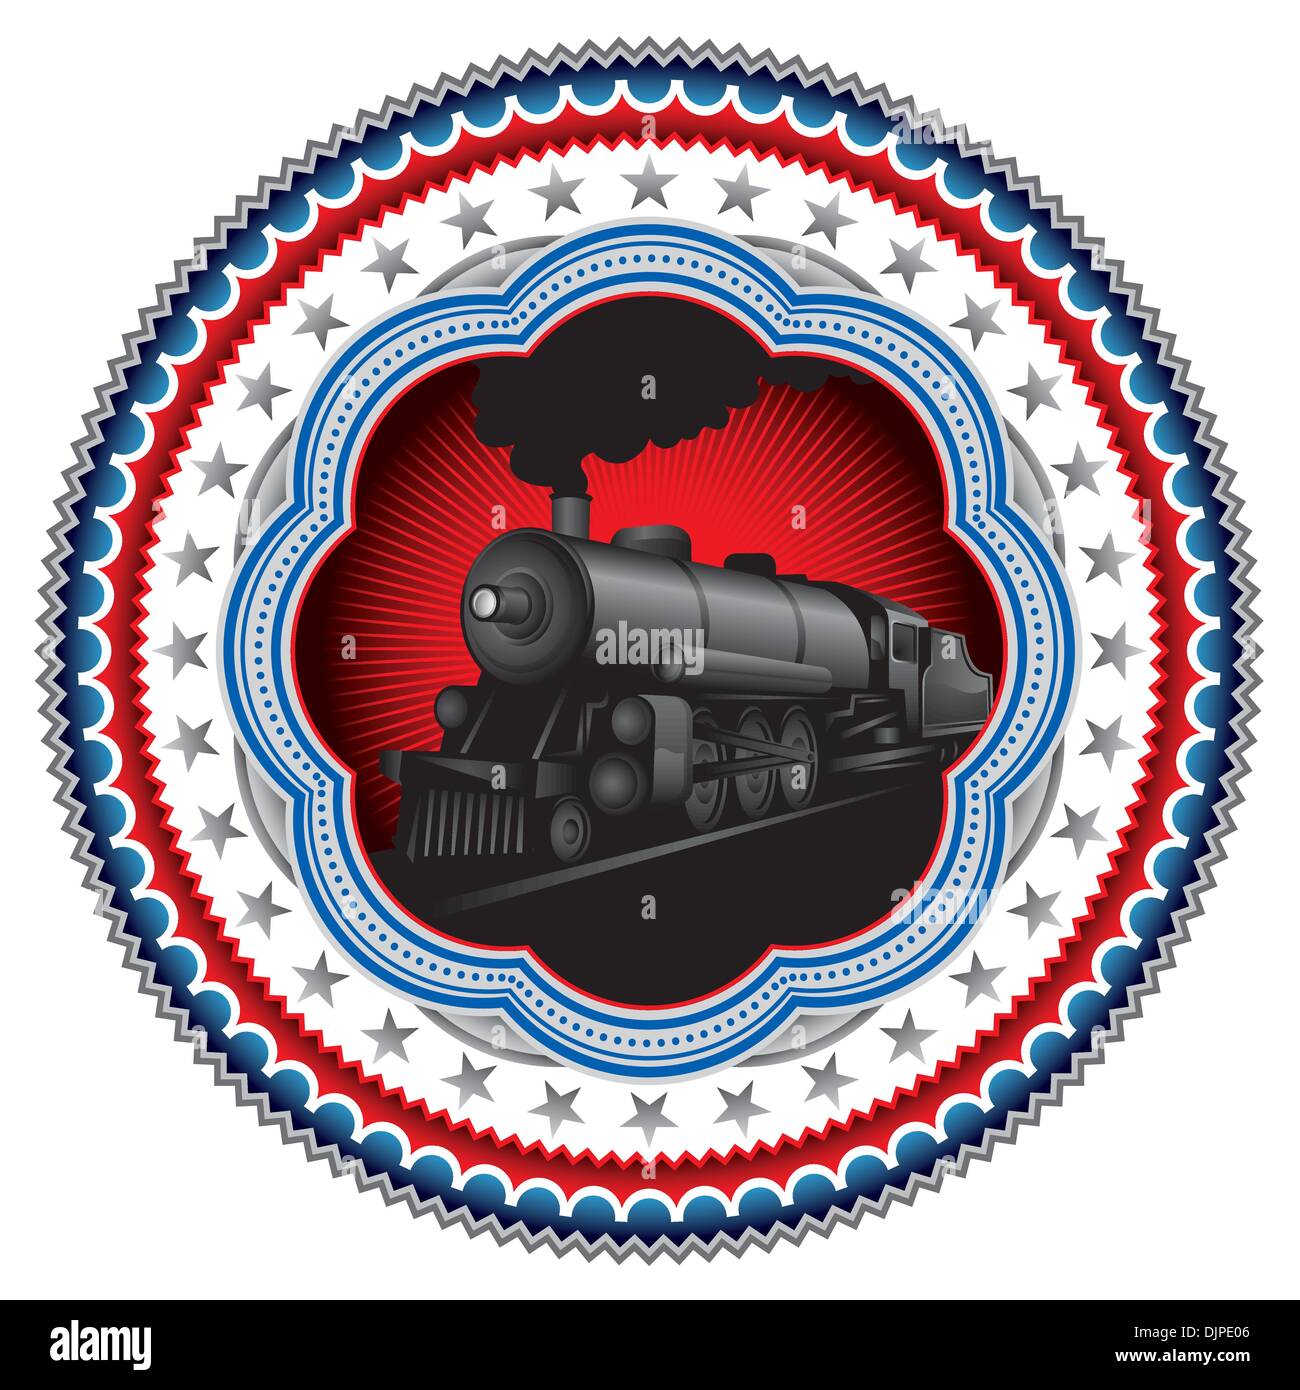 Stylish vintage label with old locomotive Stock Vector